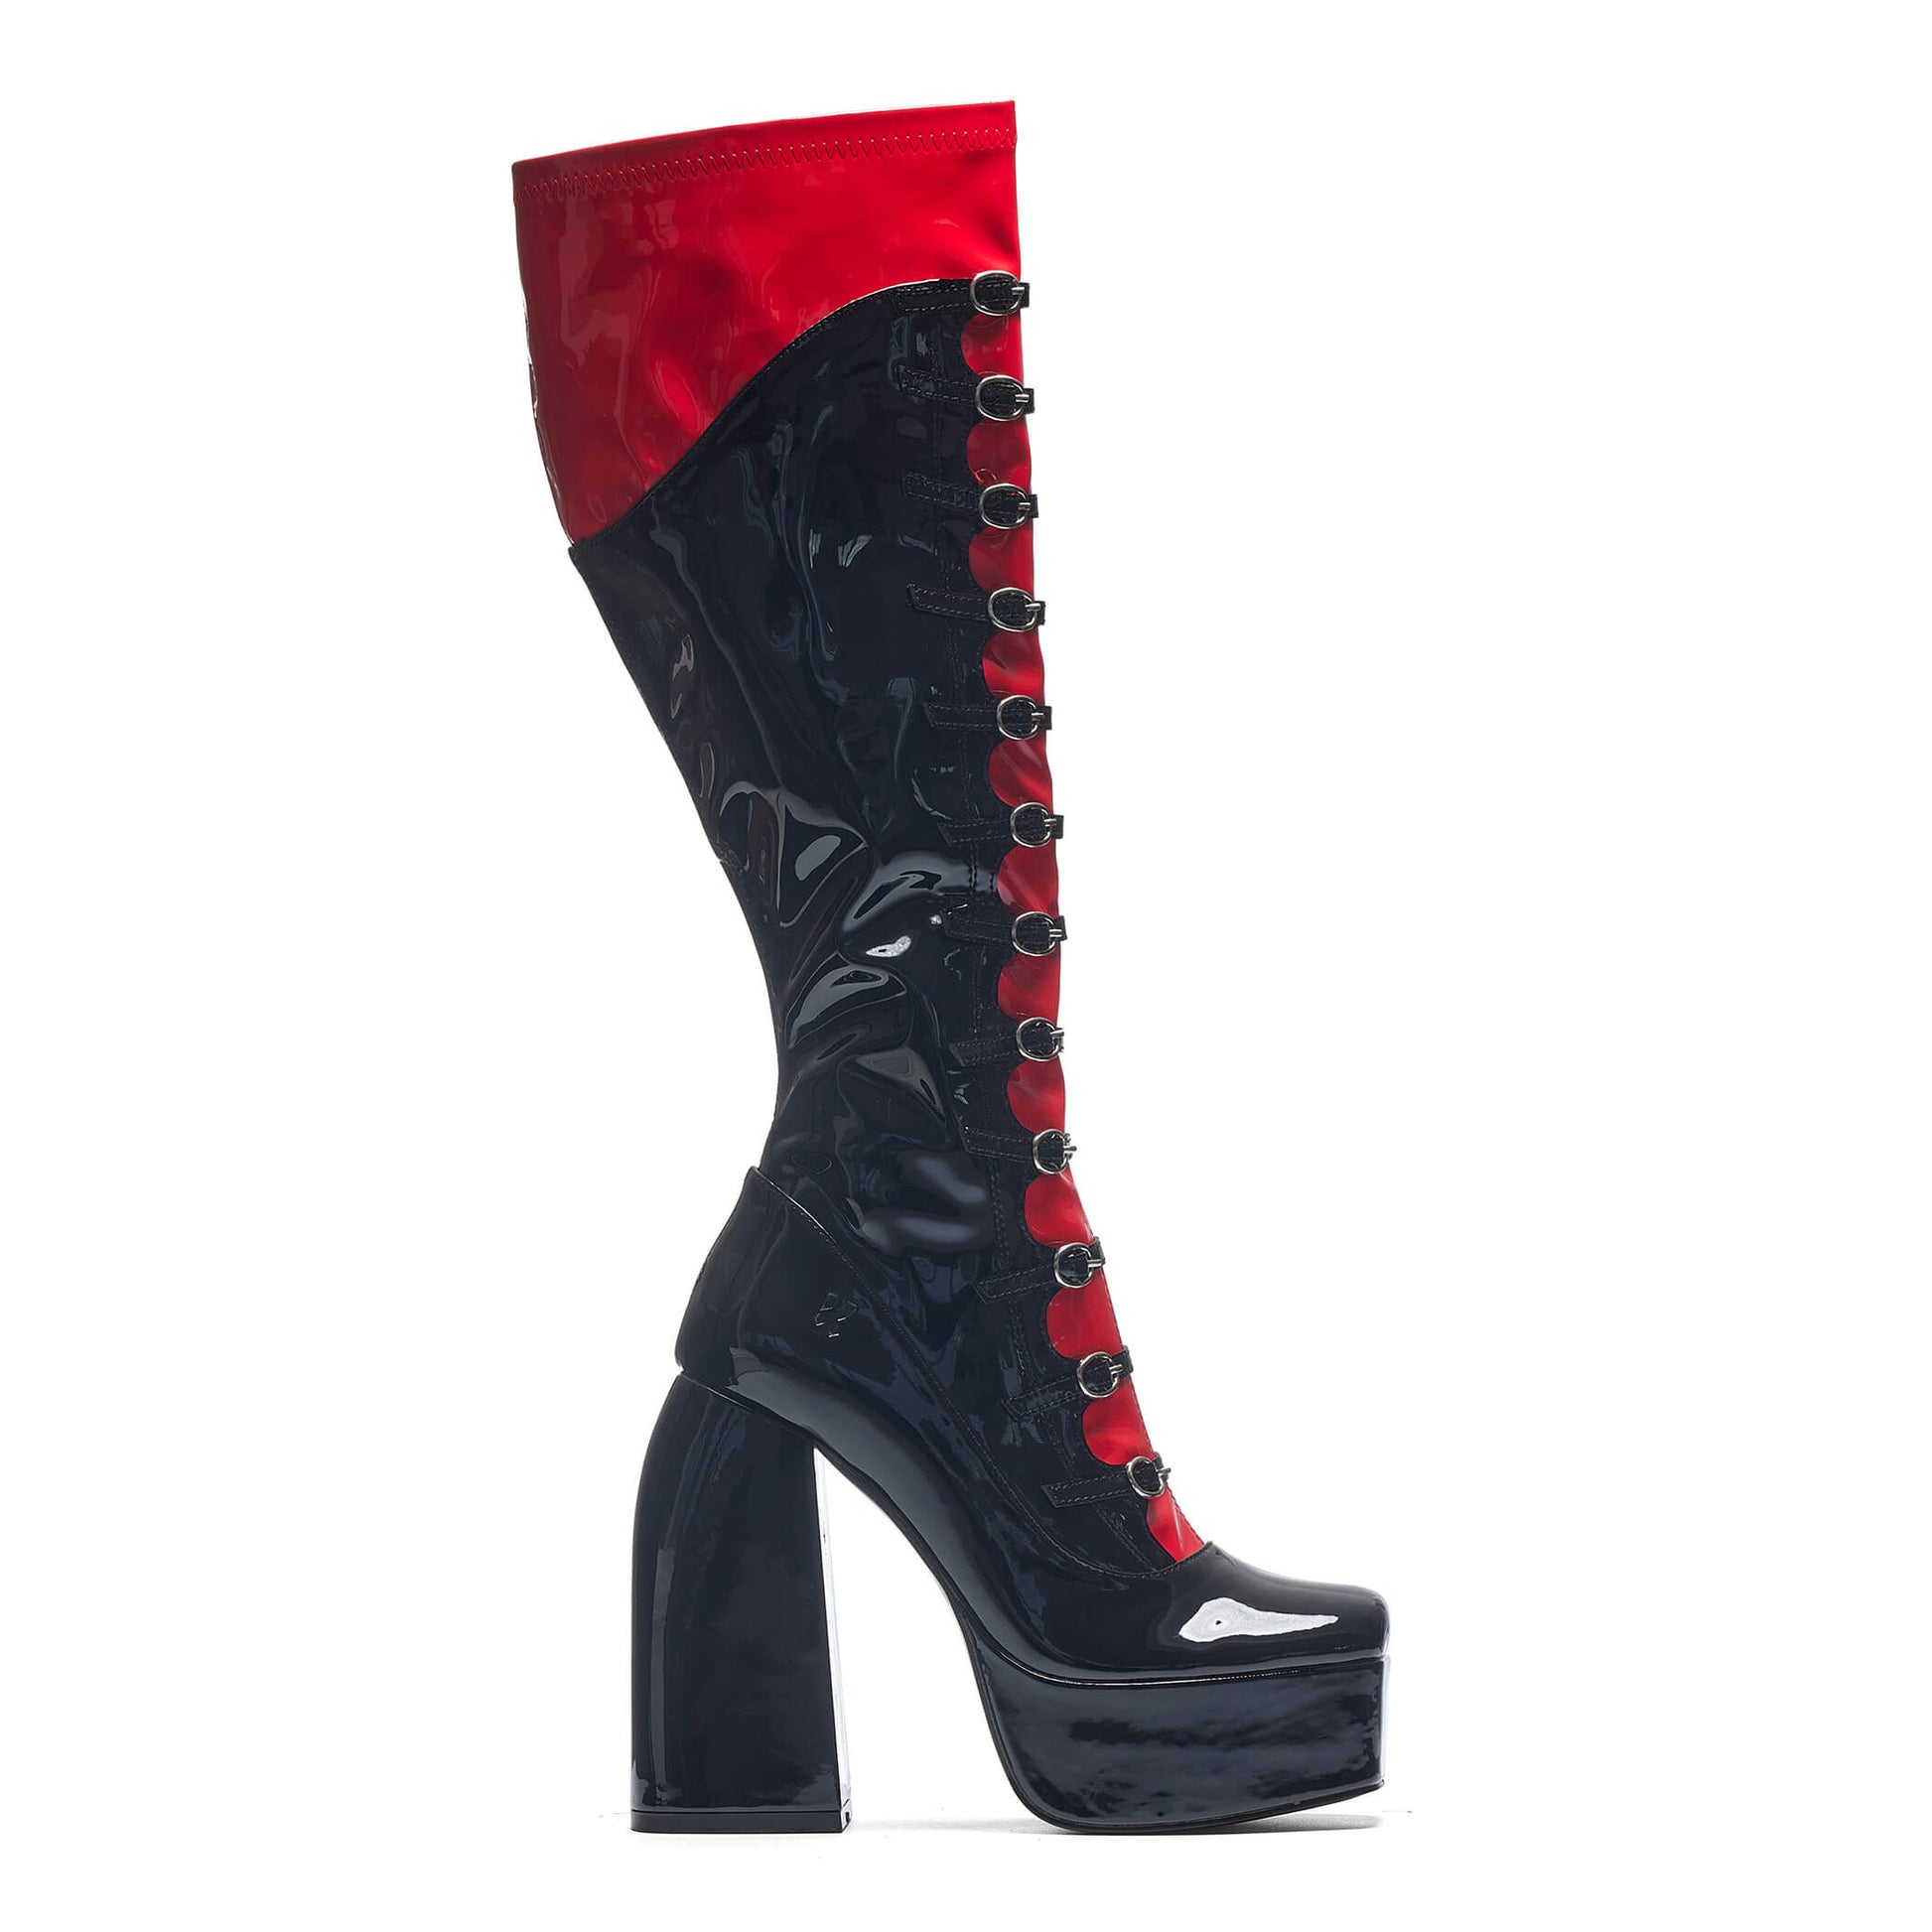 Ritual State Patent Long Boots - Red - Long Boots - KOI Footwear - Red - Side View